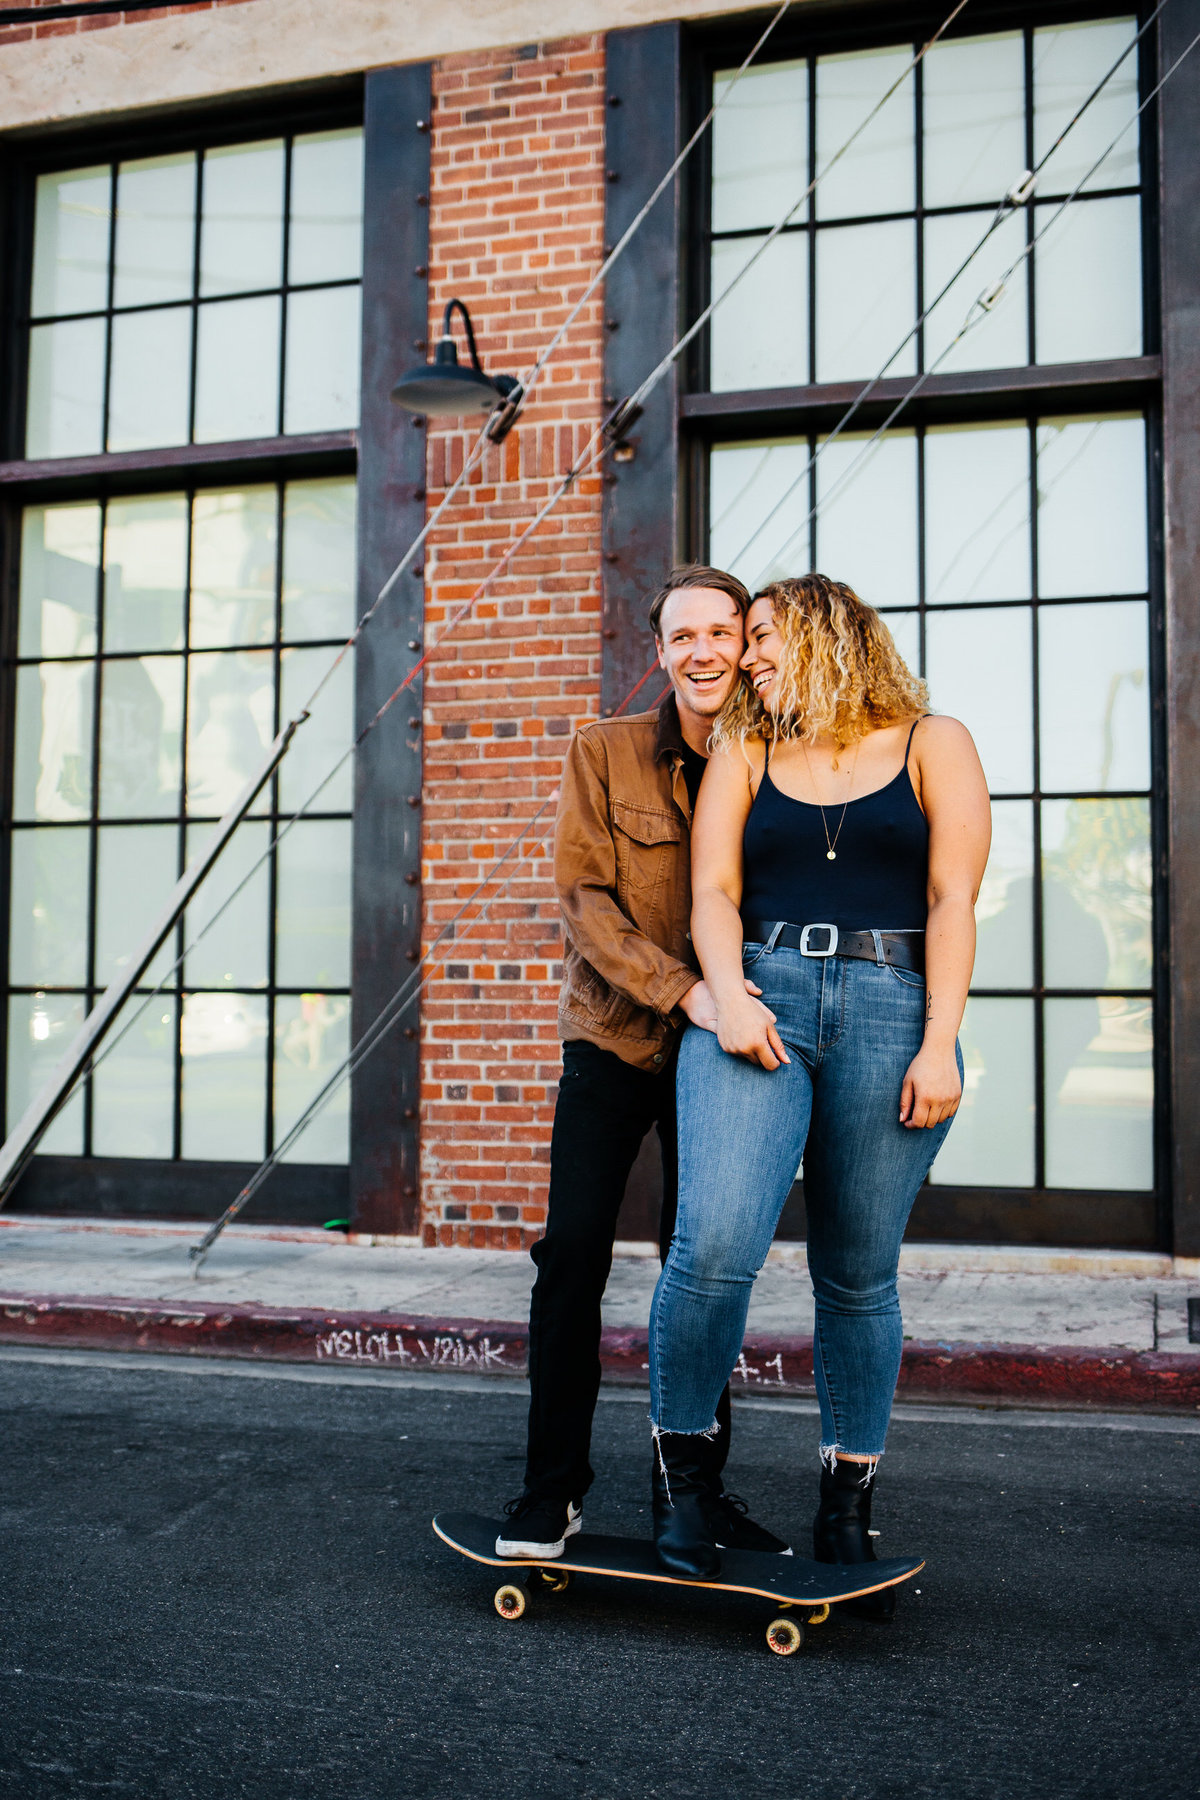 downtown-los-angeles-arts-district-engagement-photos-dtla-engagement-photos-los-angeles-wedding-photographer-erin-marton-photography-8